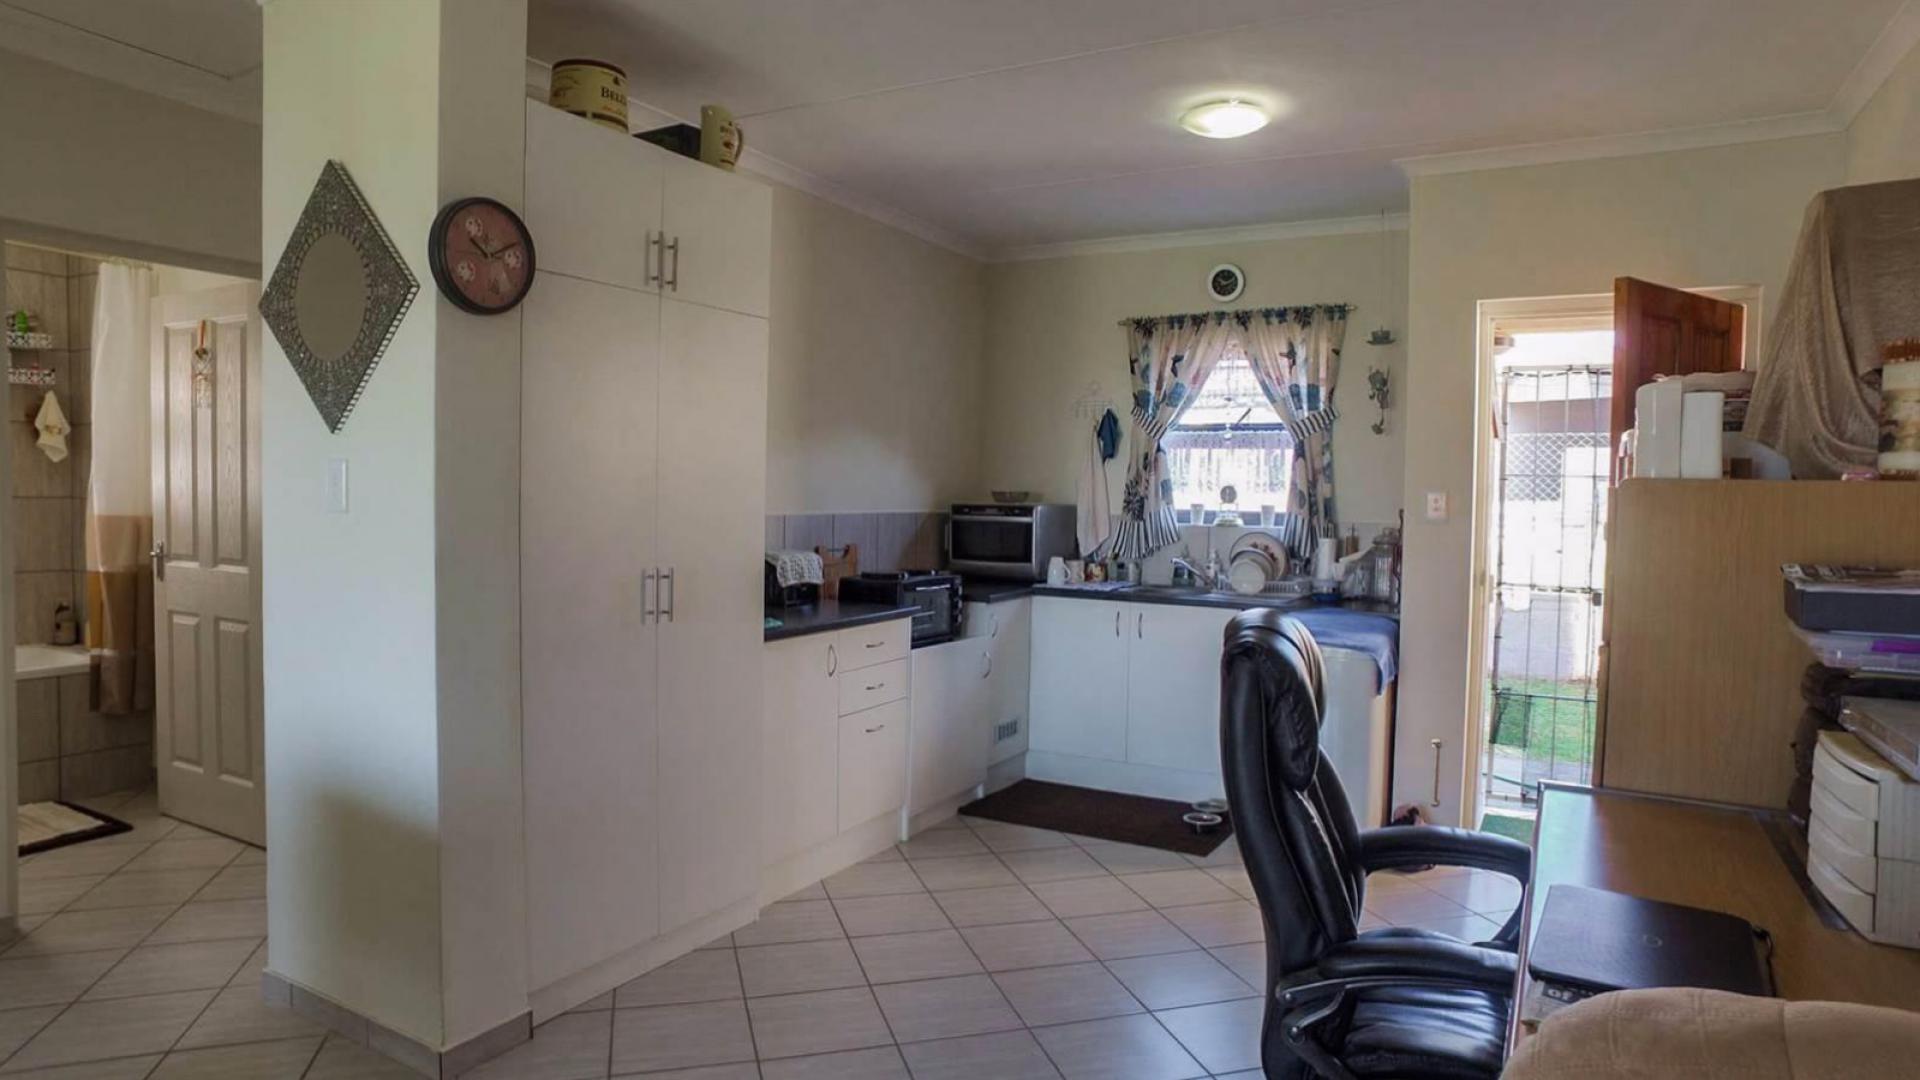 Kitchen - 10 square meters of property in Kidds Beach